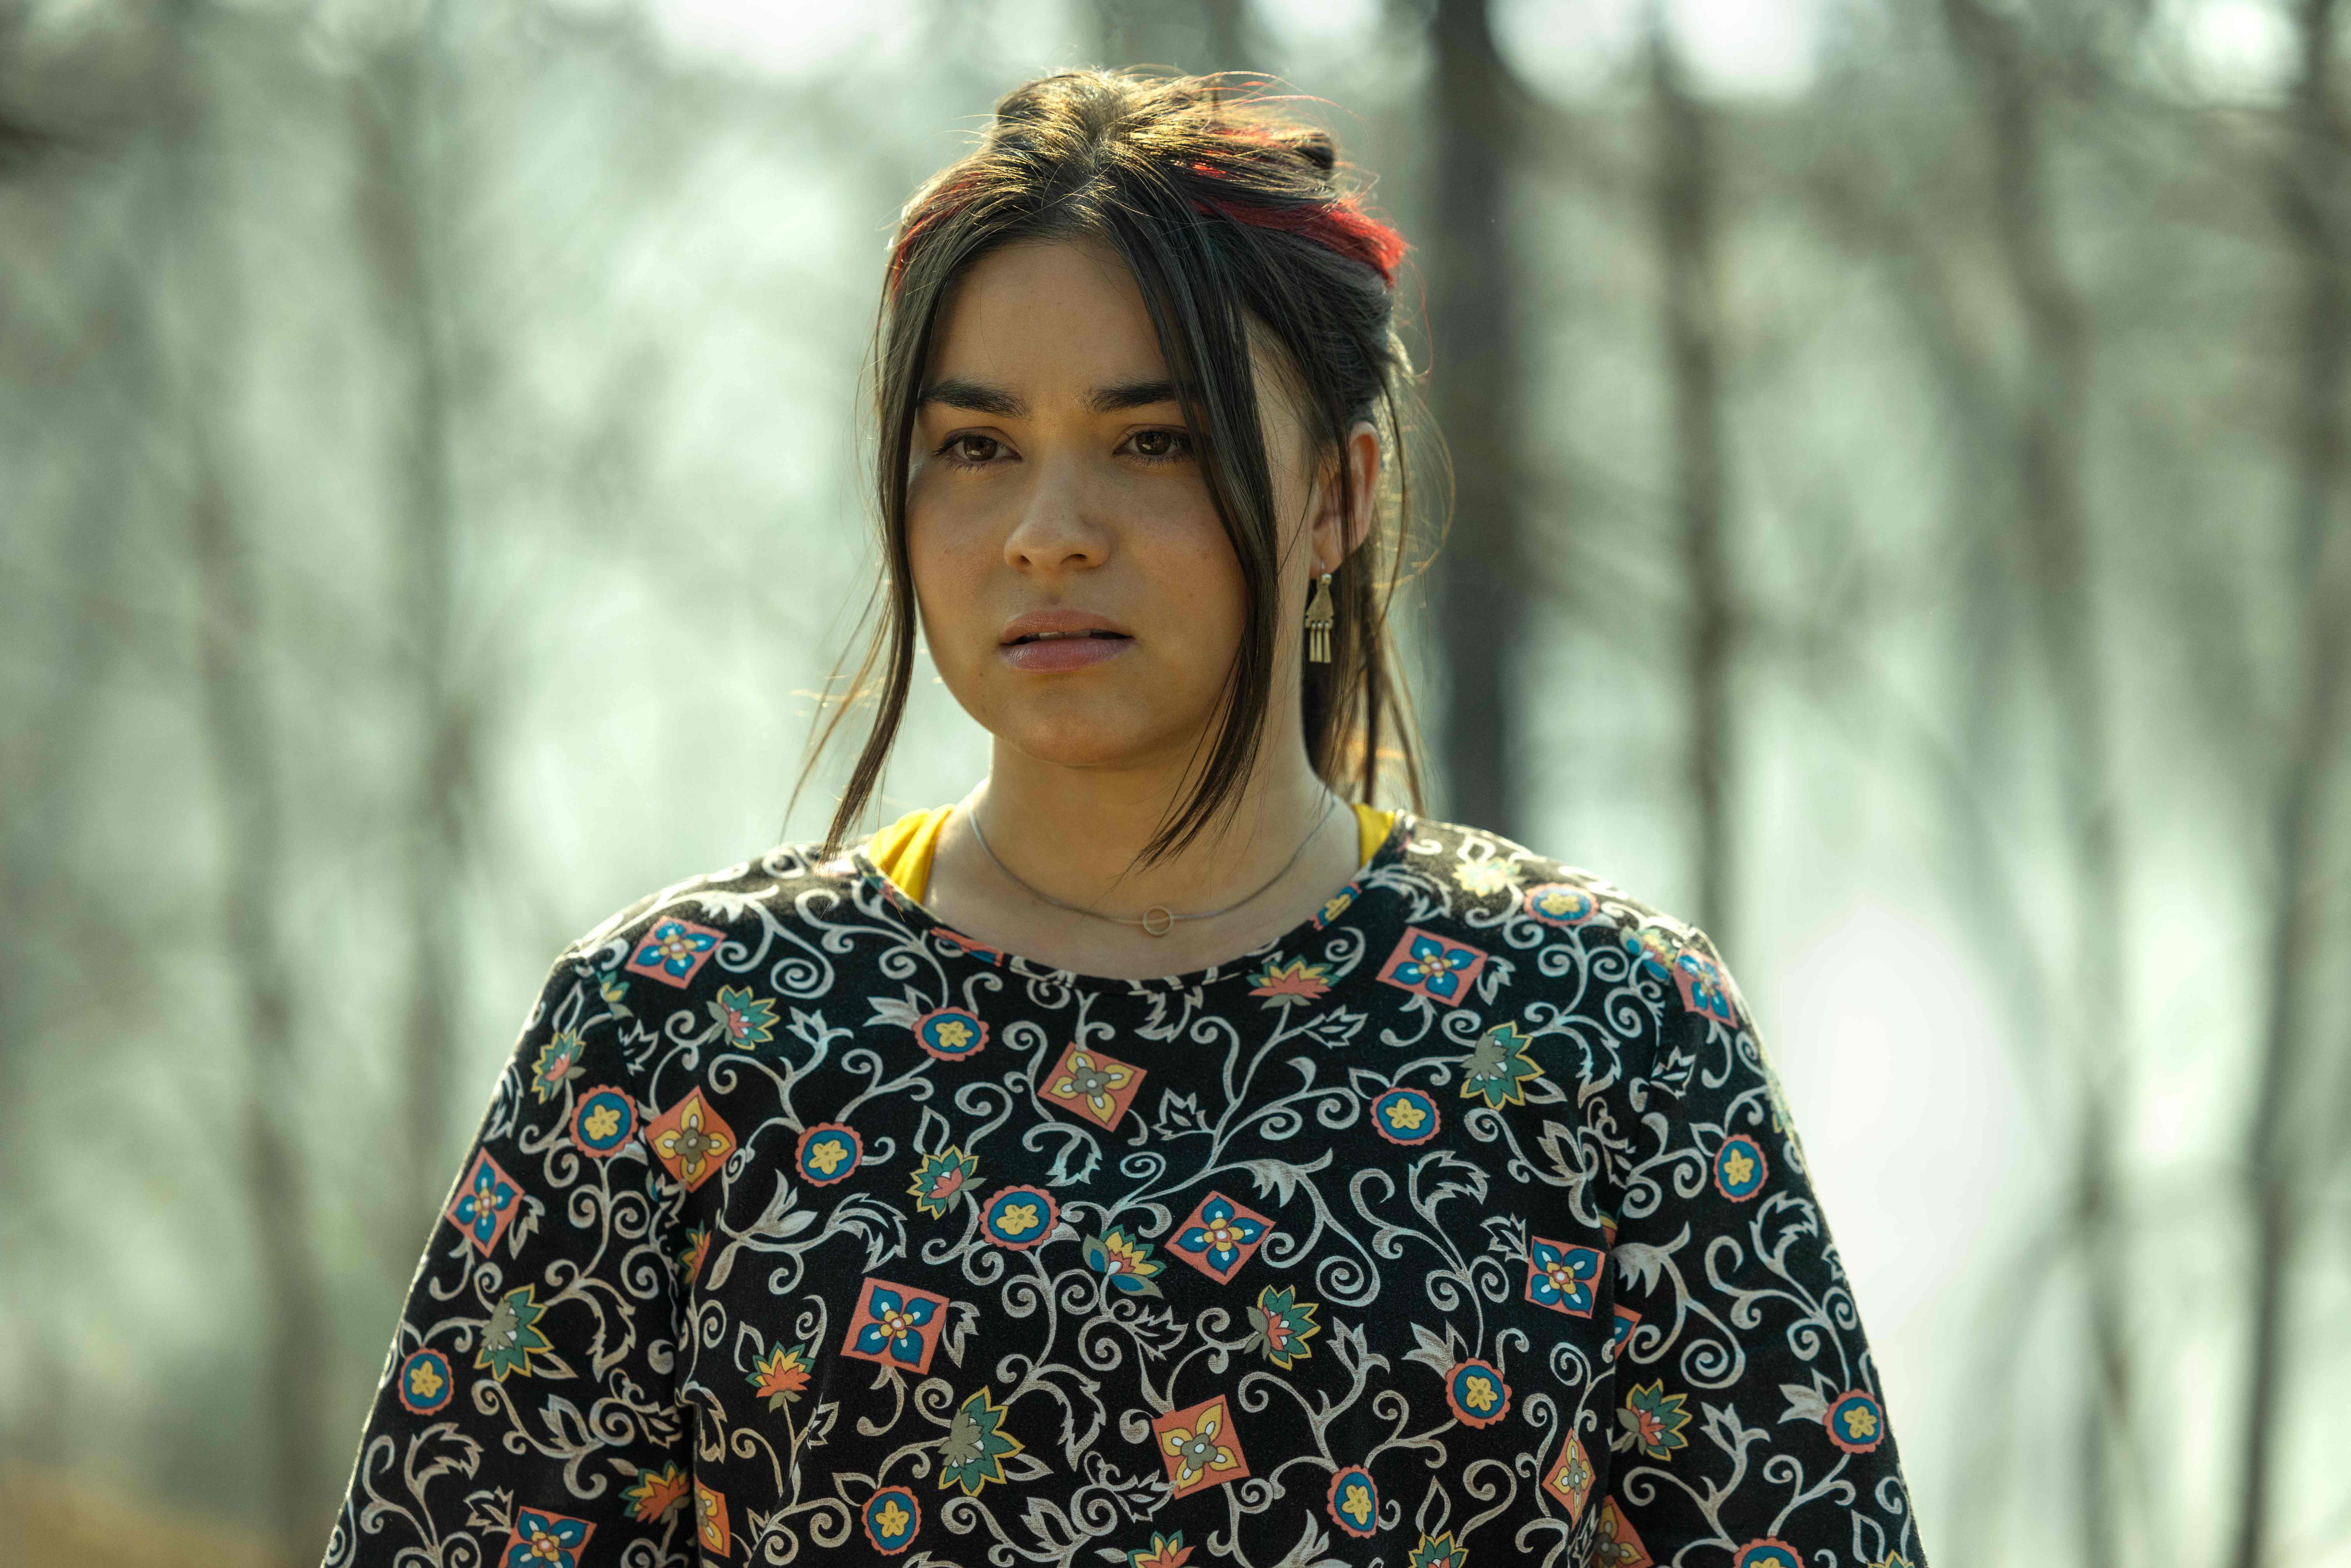 Devery Jacobs as Elora Dana weaing a floral print shirt in 'Reservation Dogs' Season 2